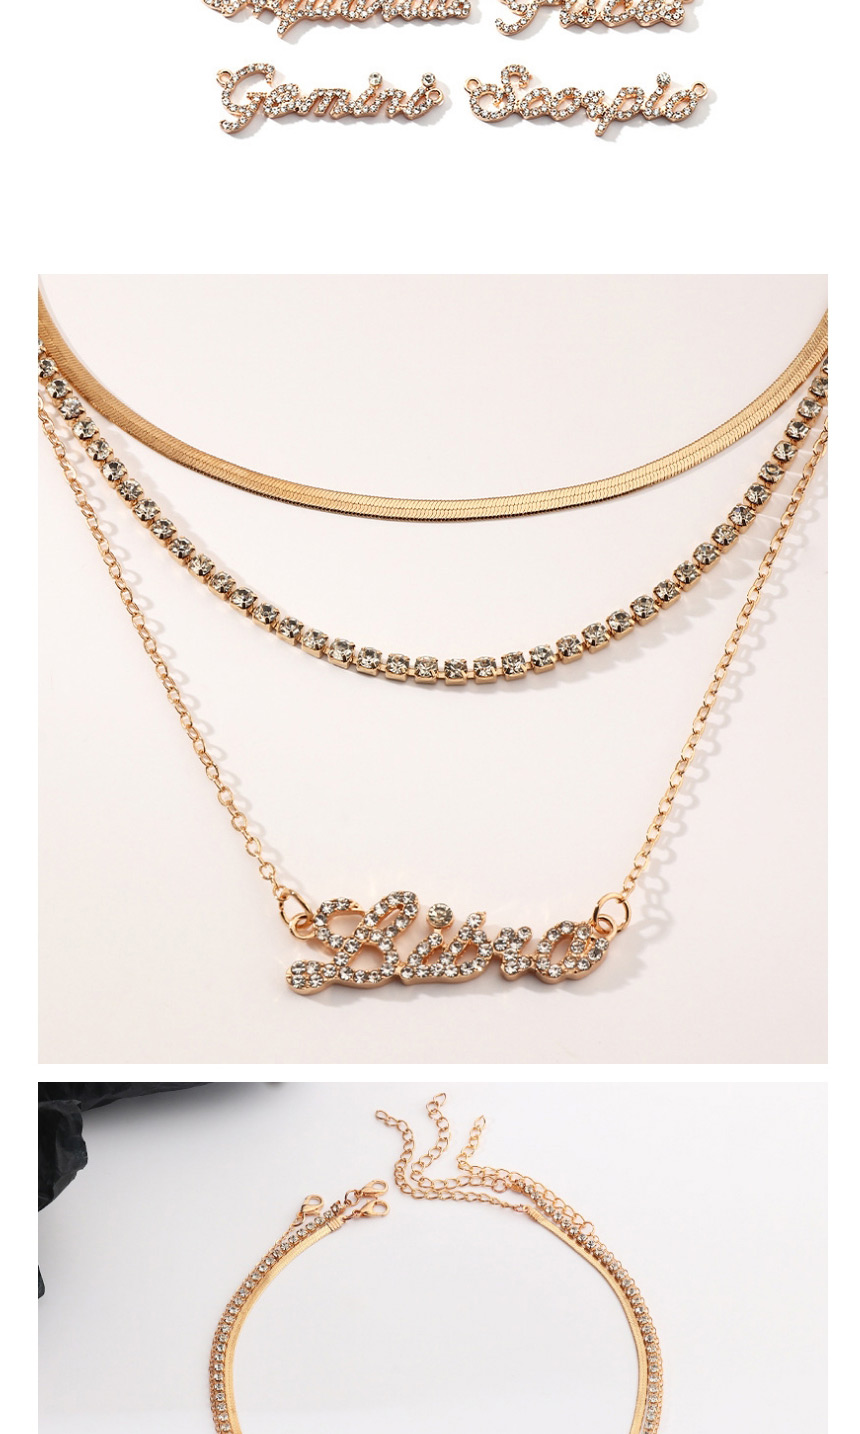 Fashion Cancer Twelve Constellation Letters Multilayer Necklace With Diamonds,Pendants